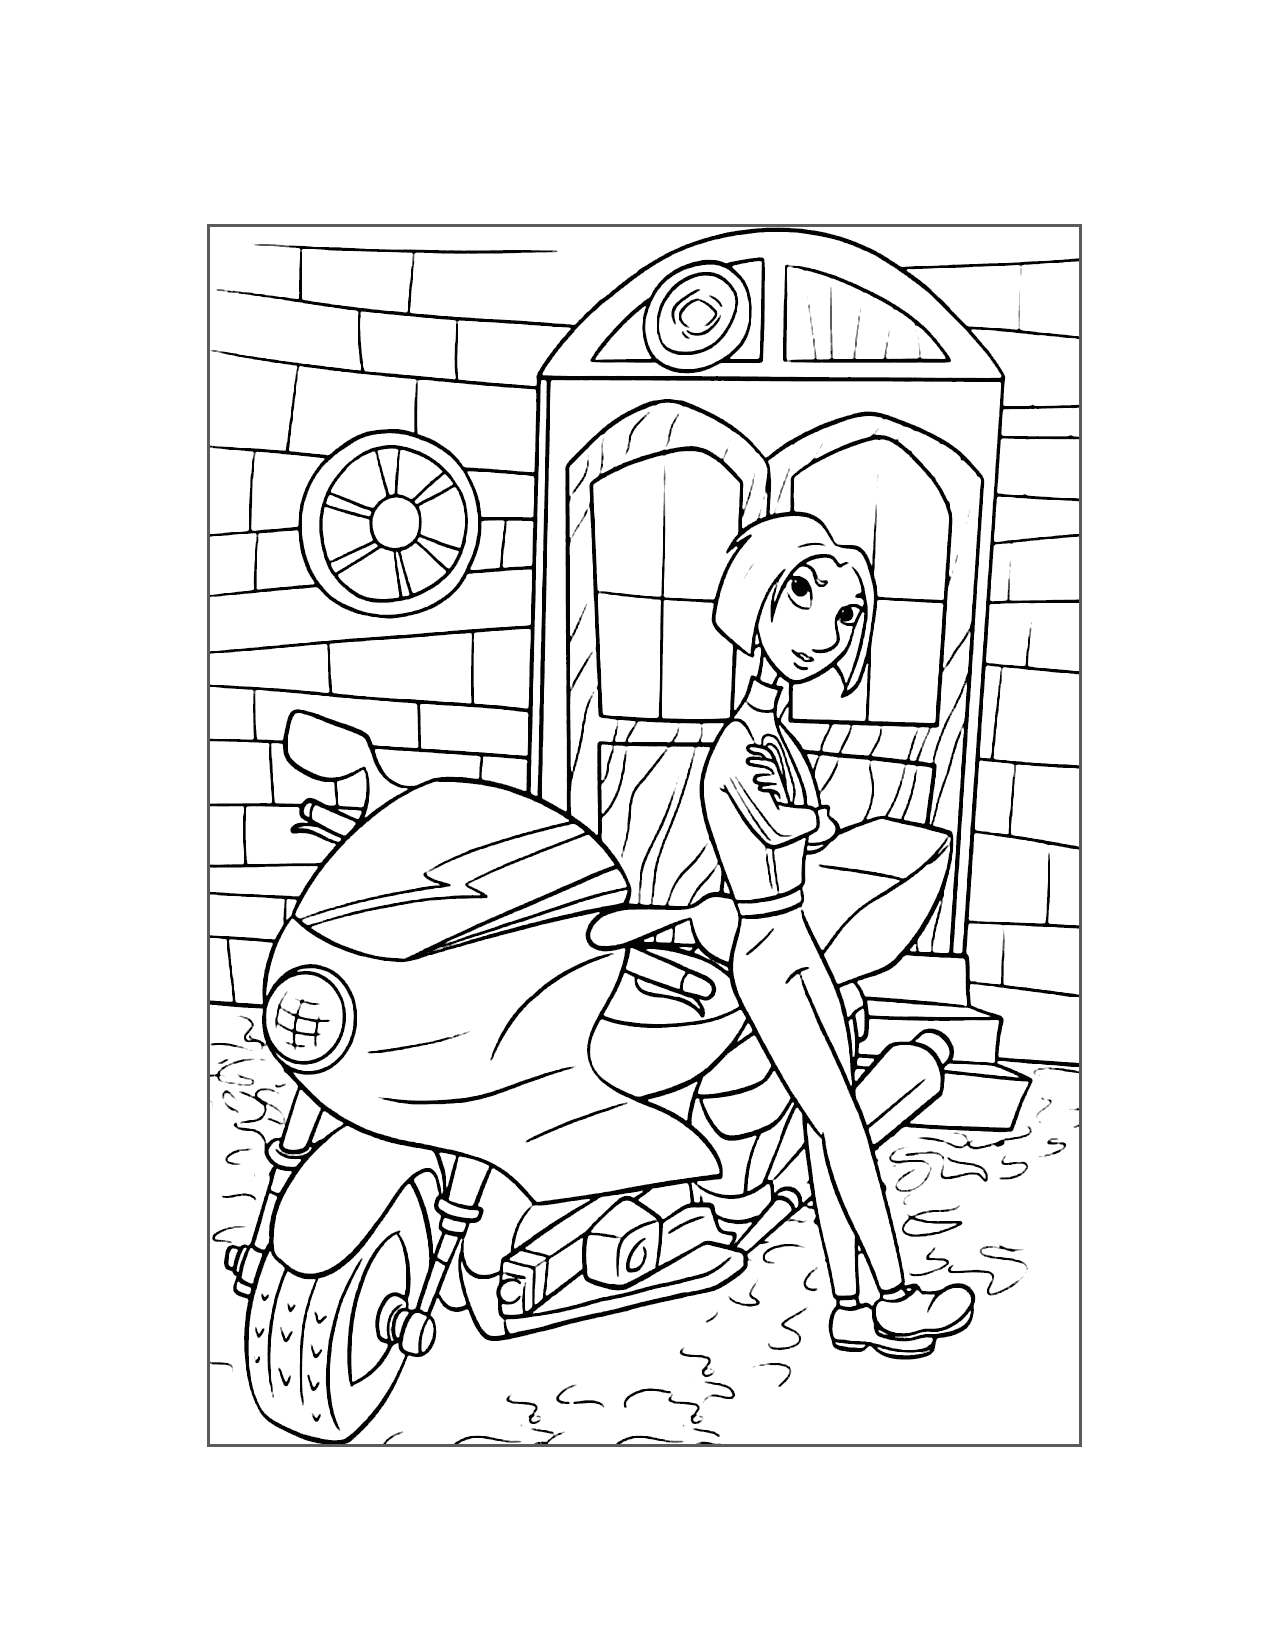 Colettes Motorcycle Ratatouille Coloring Page